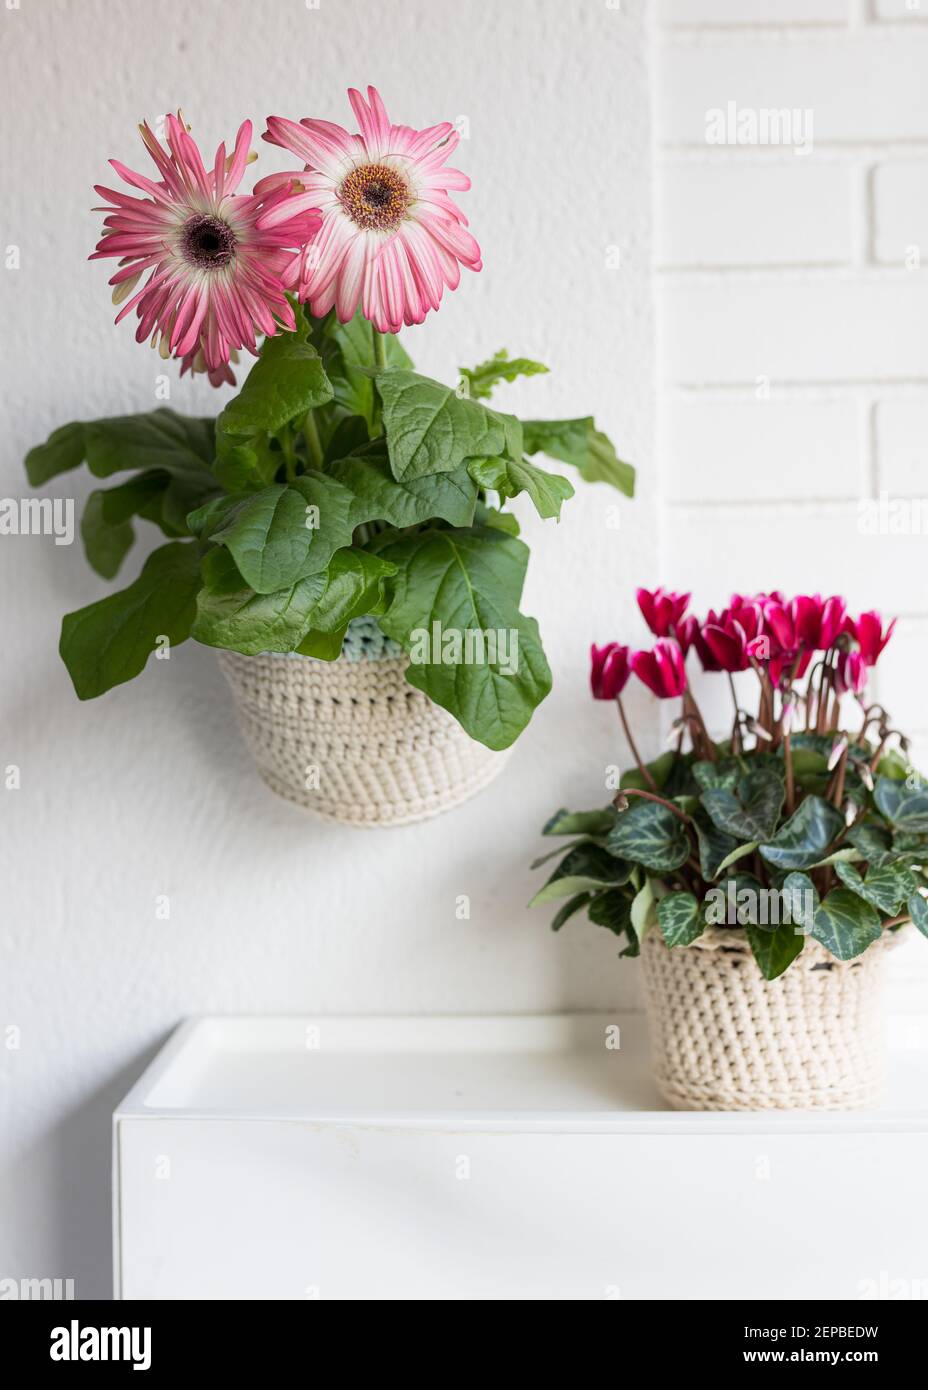 A pink cyclamen and a white and pink gerbera daisy planted in knitted pots over a white background. Stock Photo